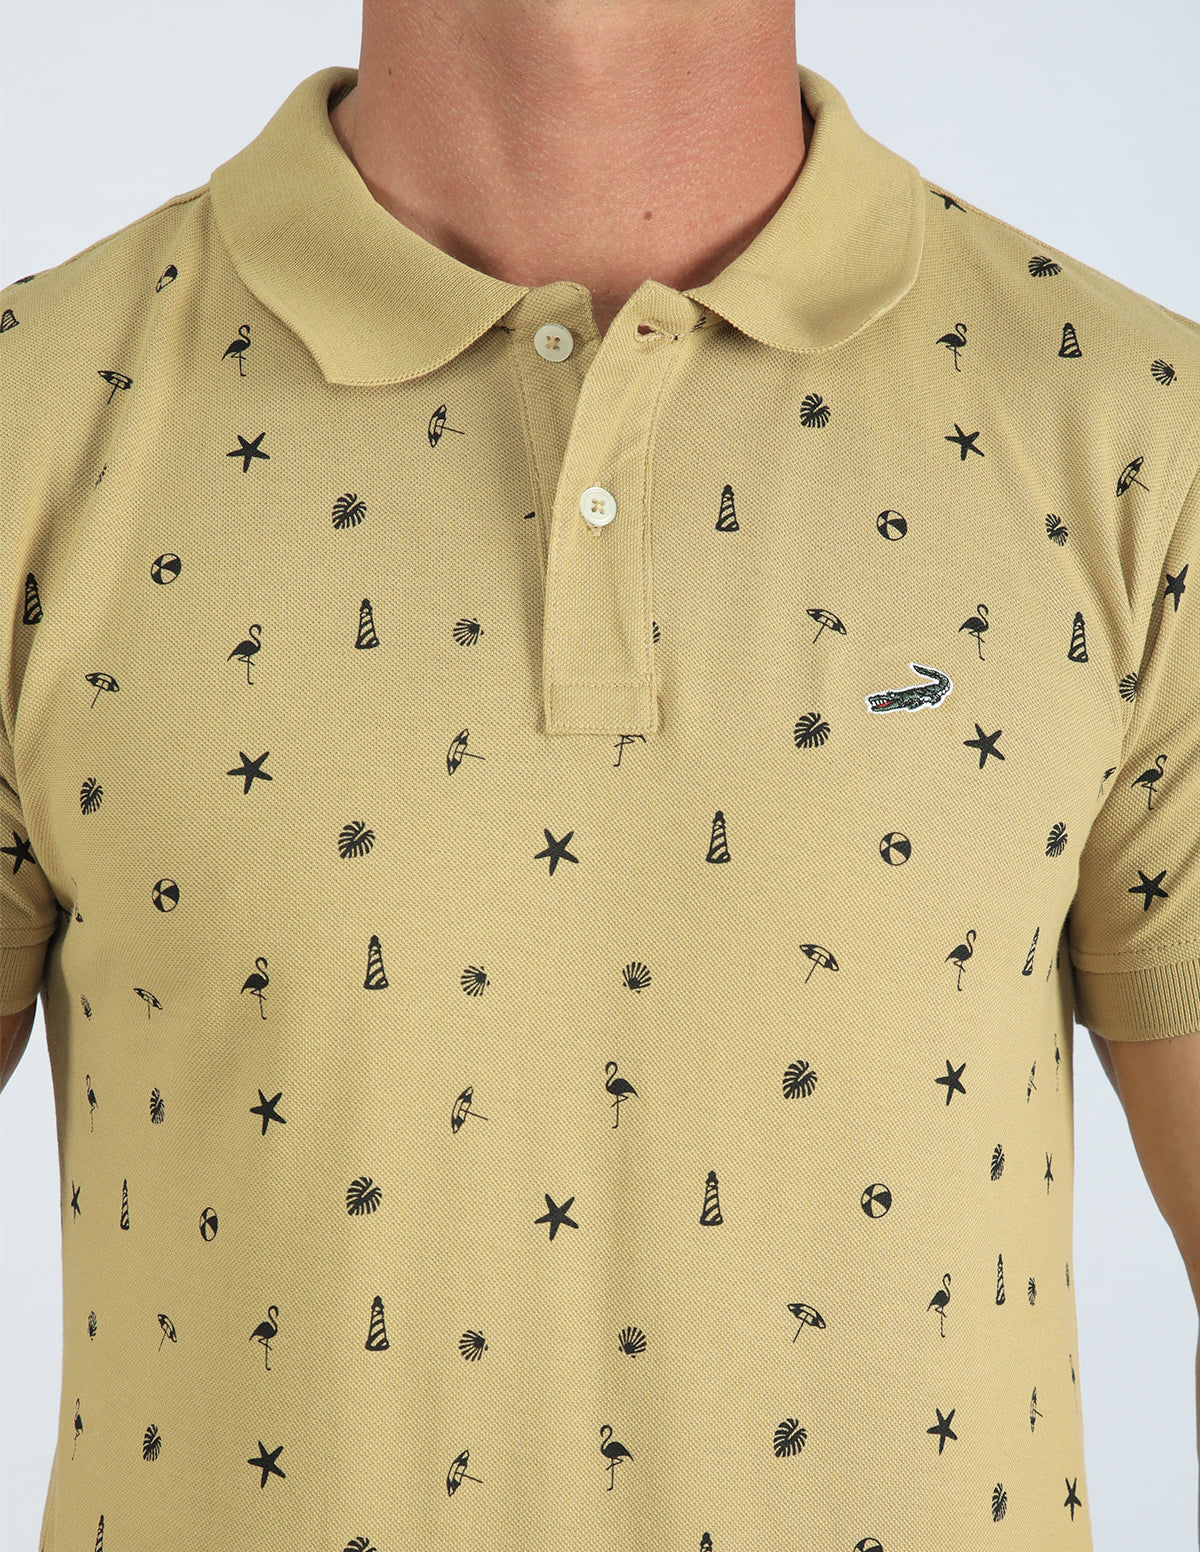 Crocodile Slim Fit Short sleeves-Casual Polo - Curry